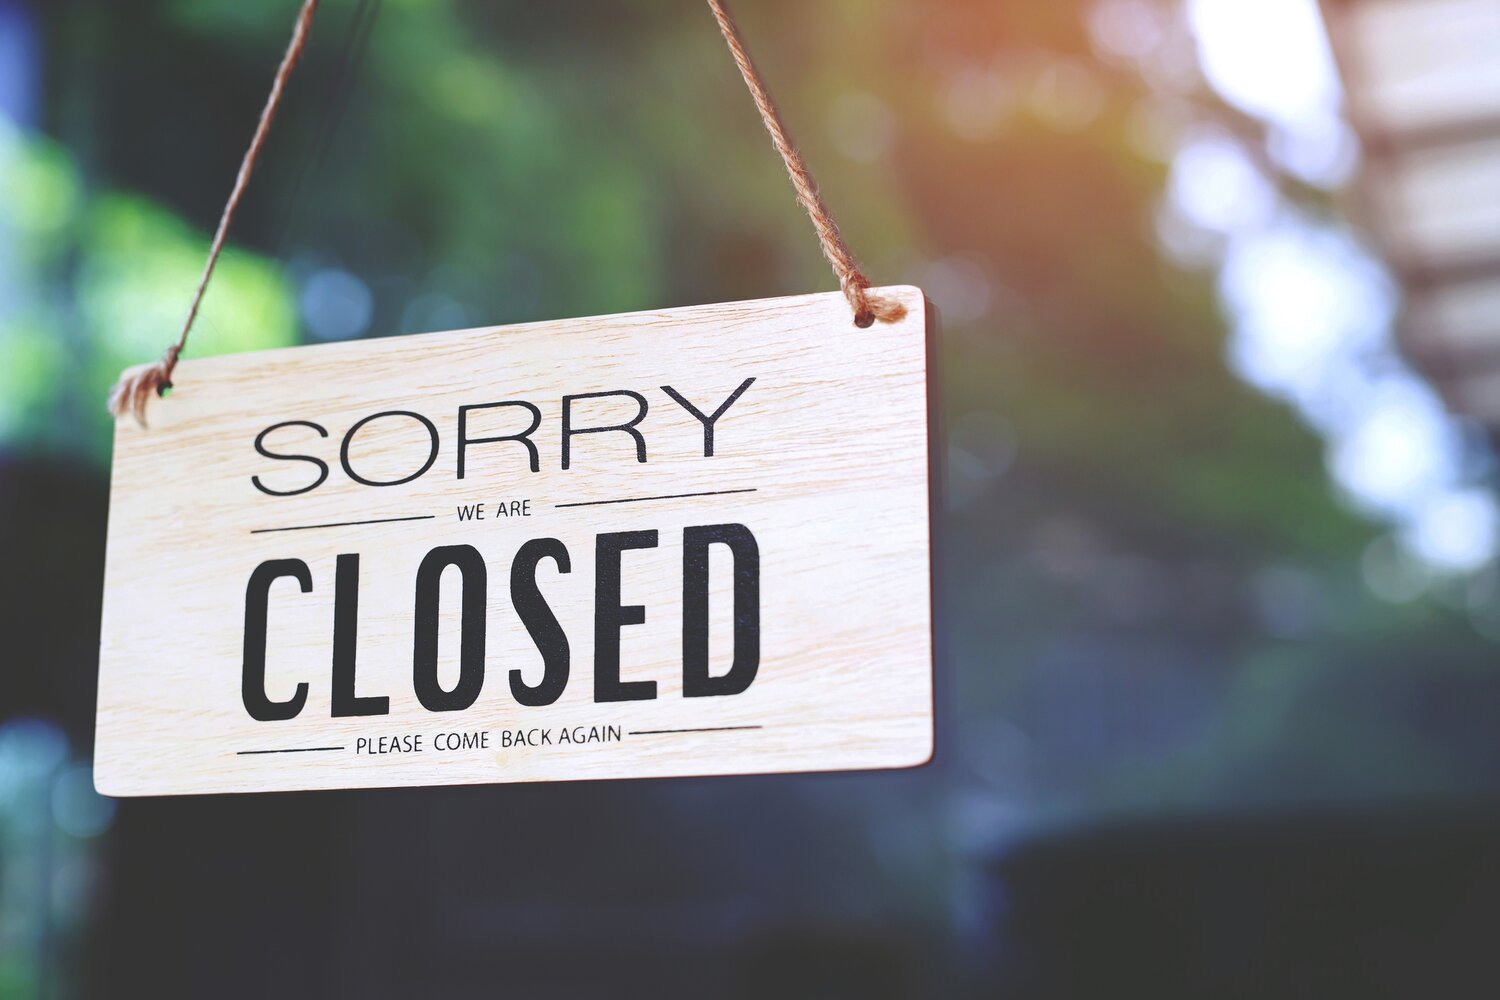 Government offices and services closed for the holiday